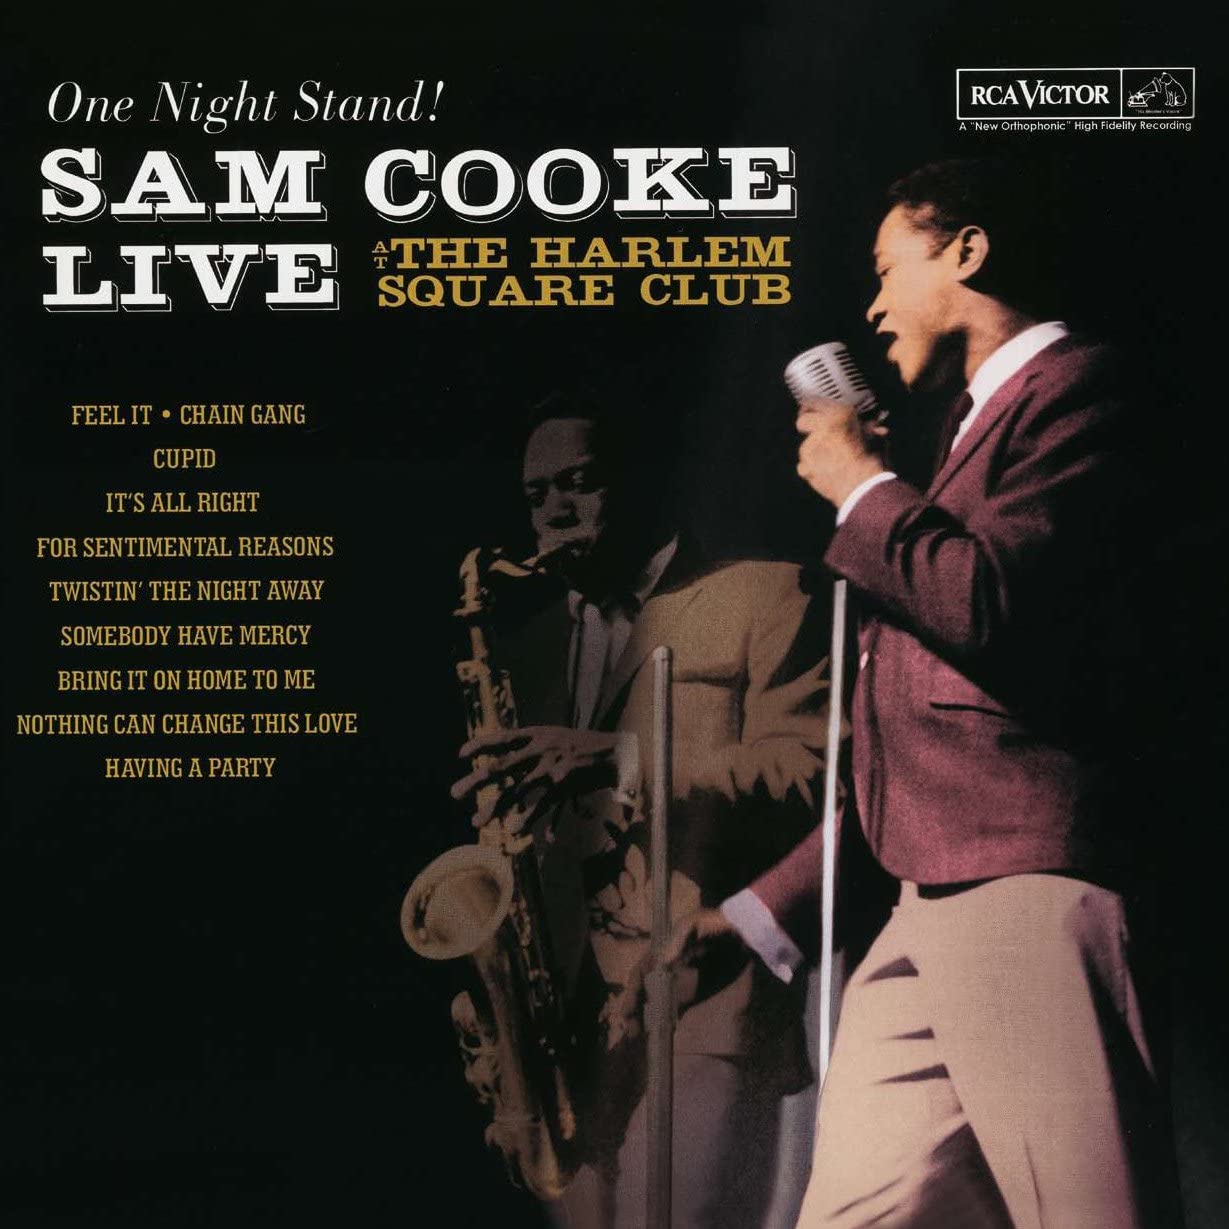 Sam Cooke - One Night Stand! Live at the Harlem Square Club (Vinyl LP)